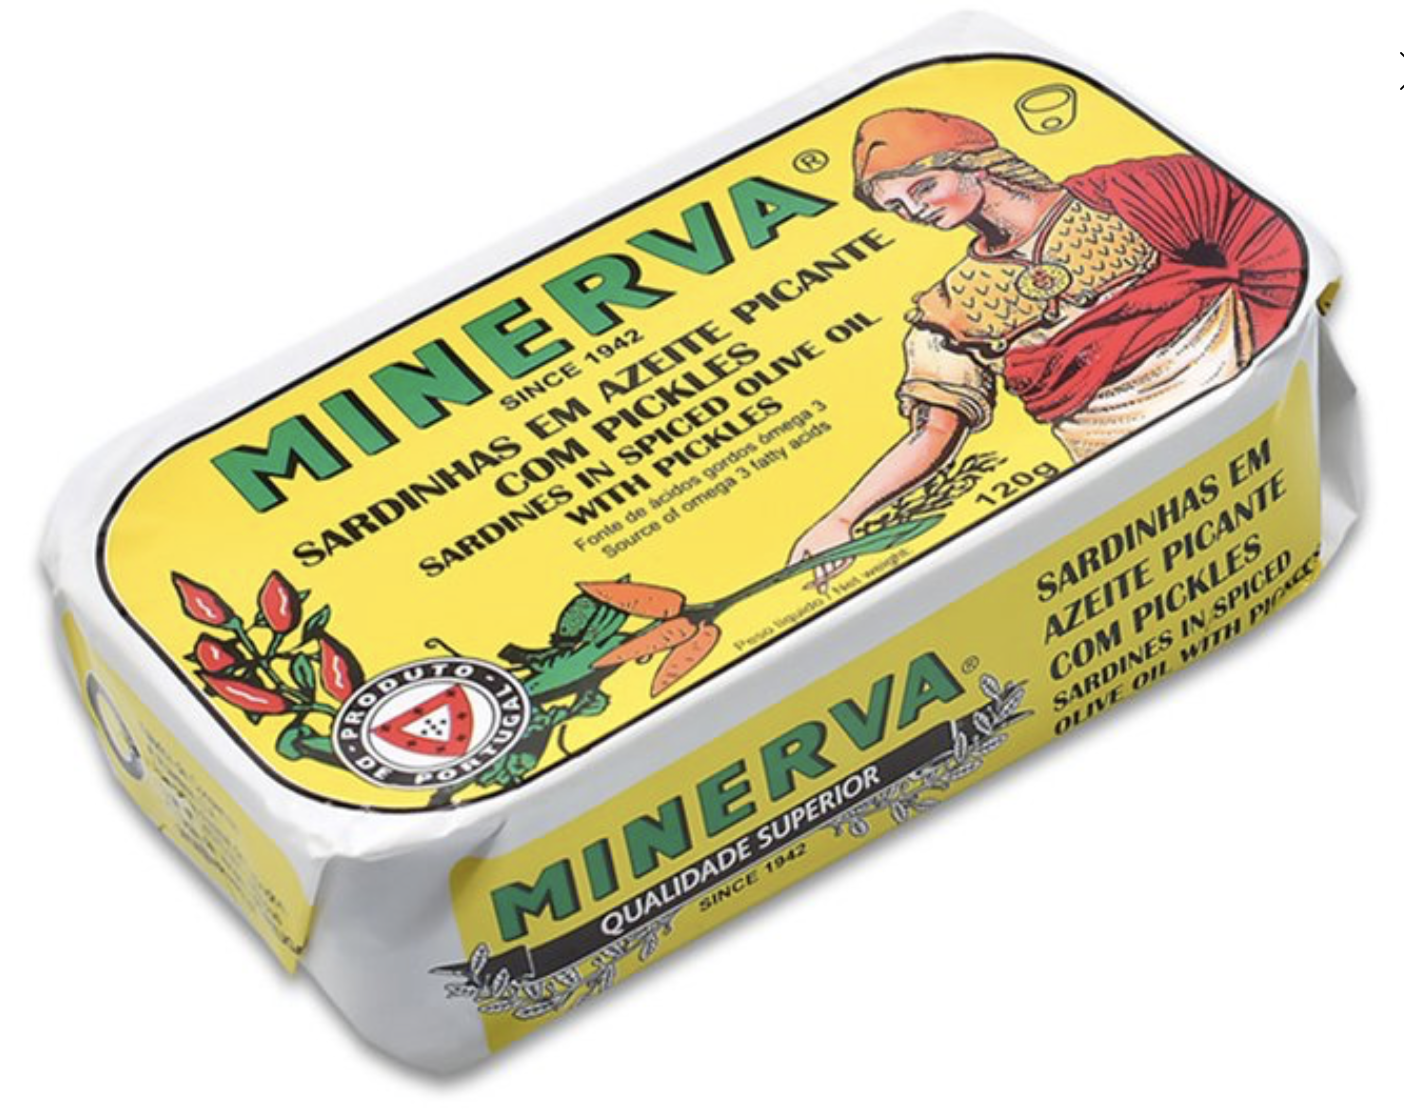 Minerva Spiced Sardines in Olive Oil with Pickles